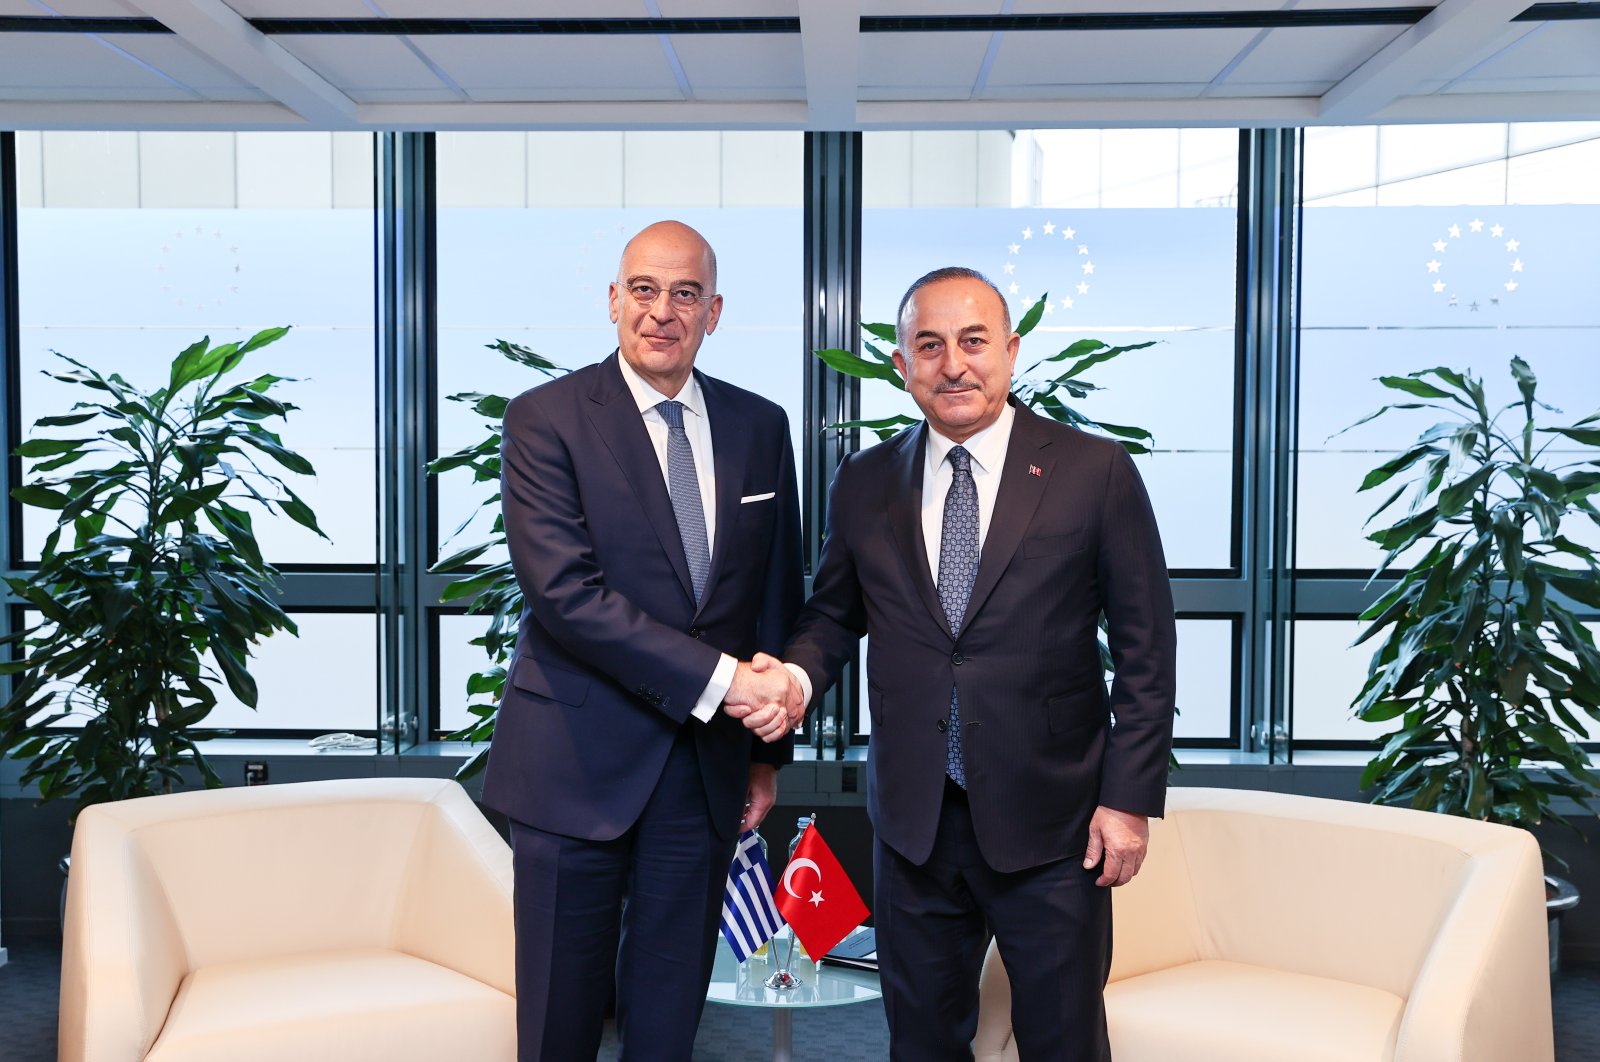 Foreign Minister Mevlüt Çavuşoğlu (R) and Greek Foreign Minister Nikos Dendias pose for a picture on the sidelines of the International Donors’ Conference in Brussels, Belgium, March 20, 2023. (AA Photo)